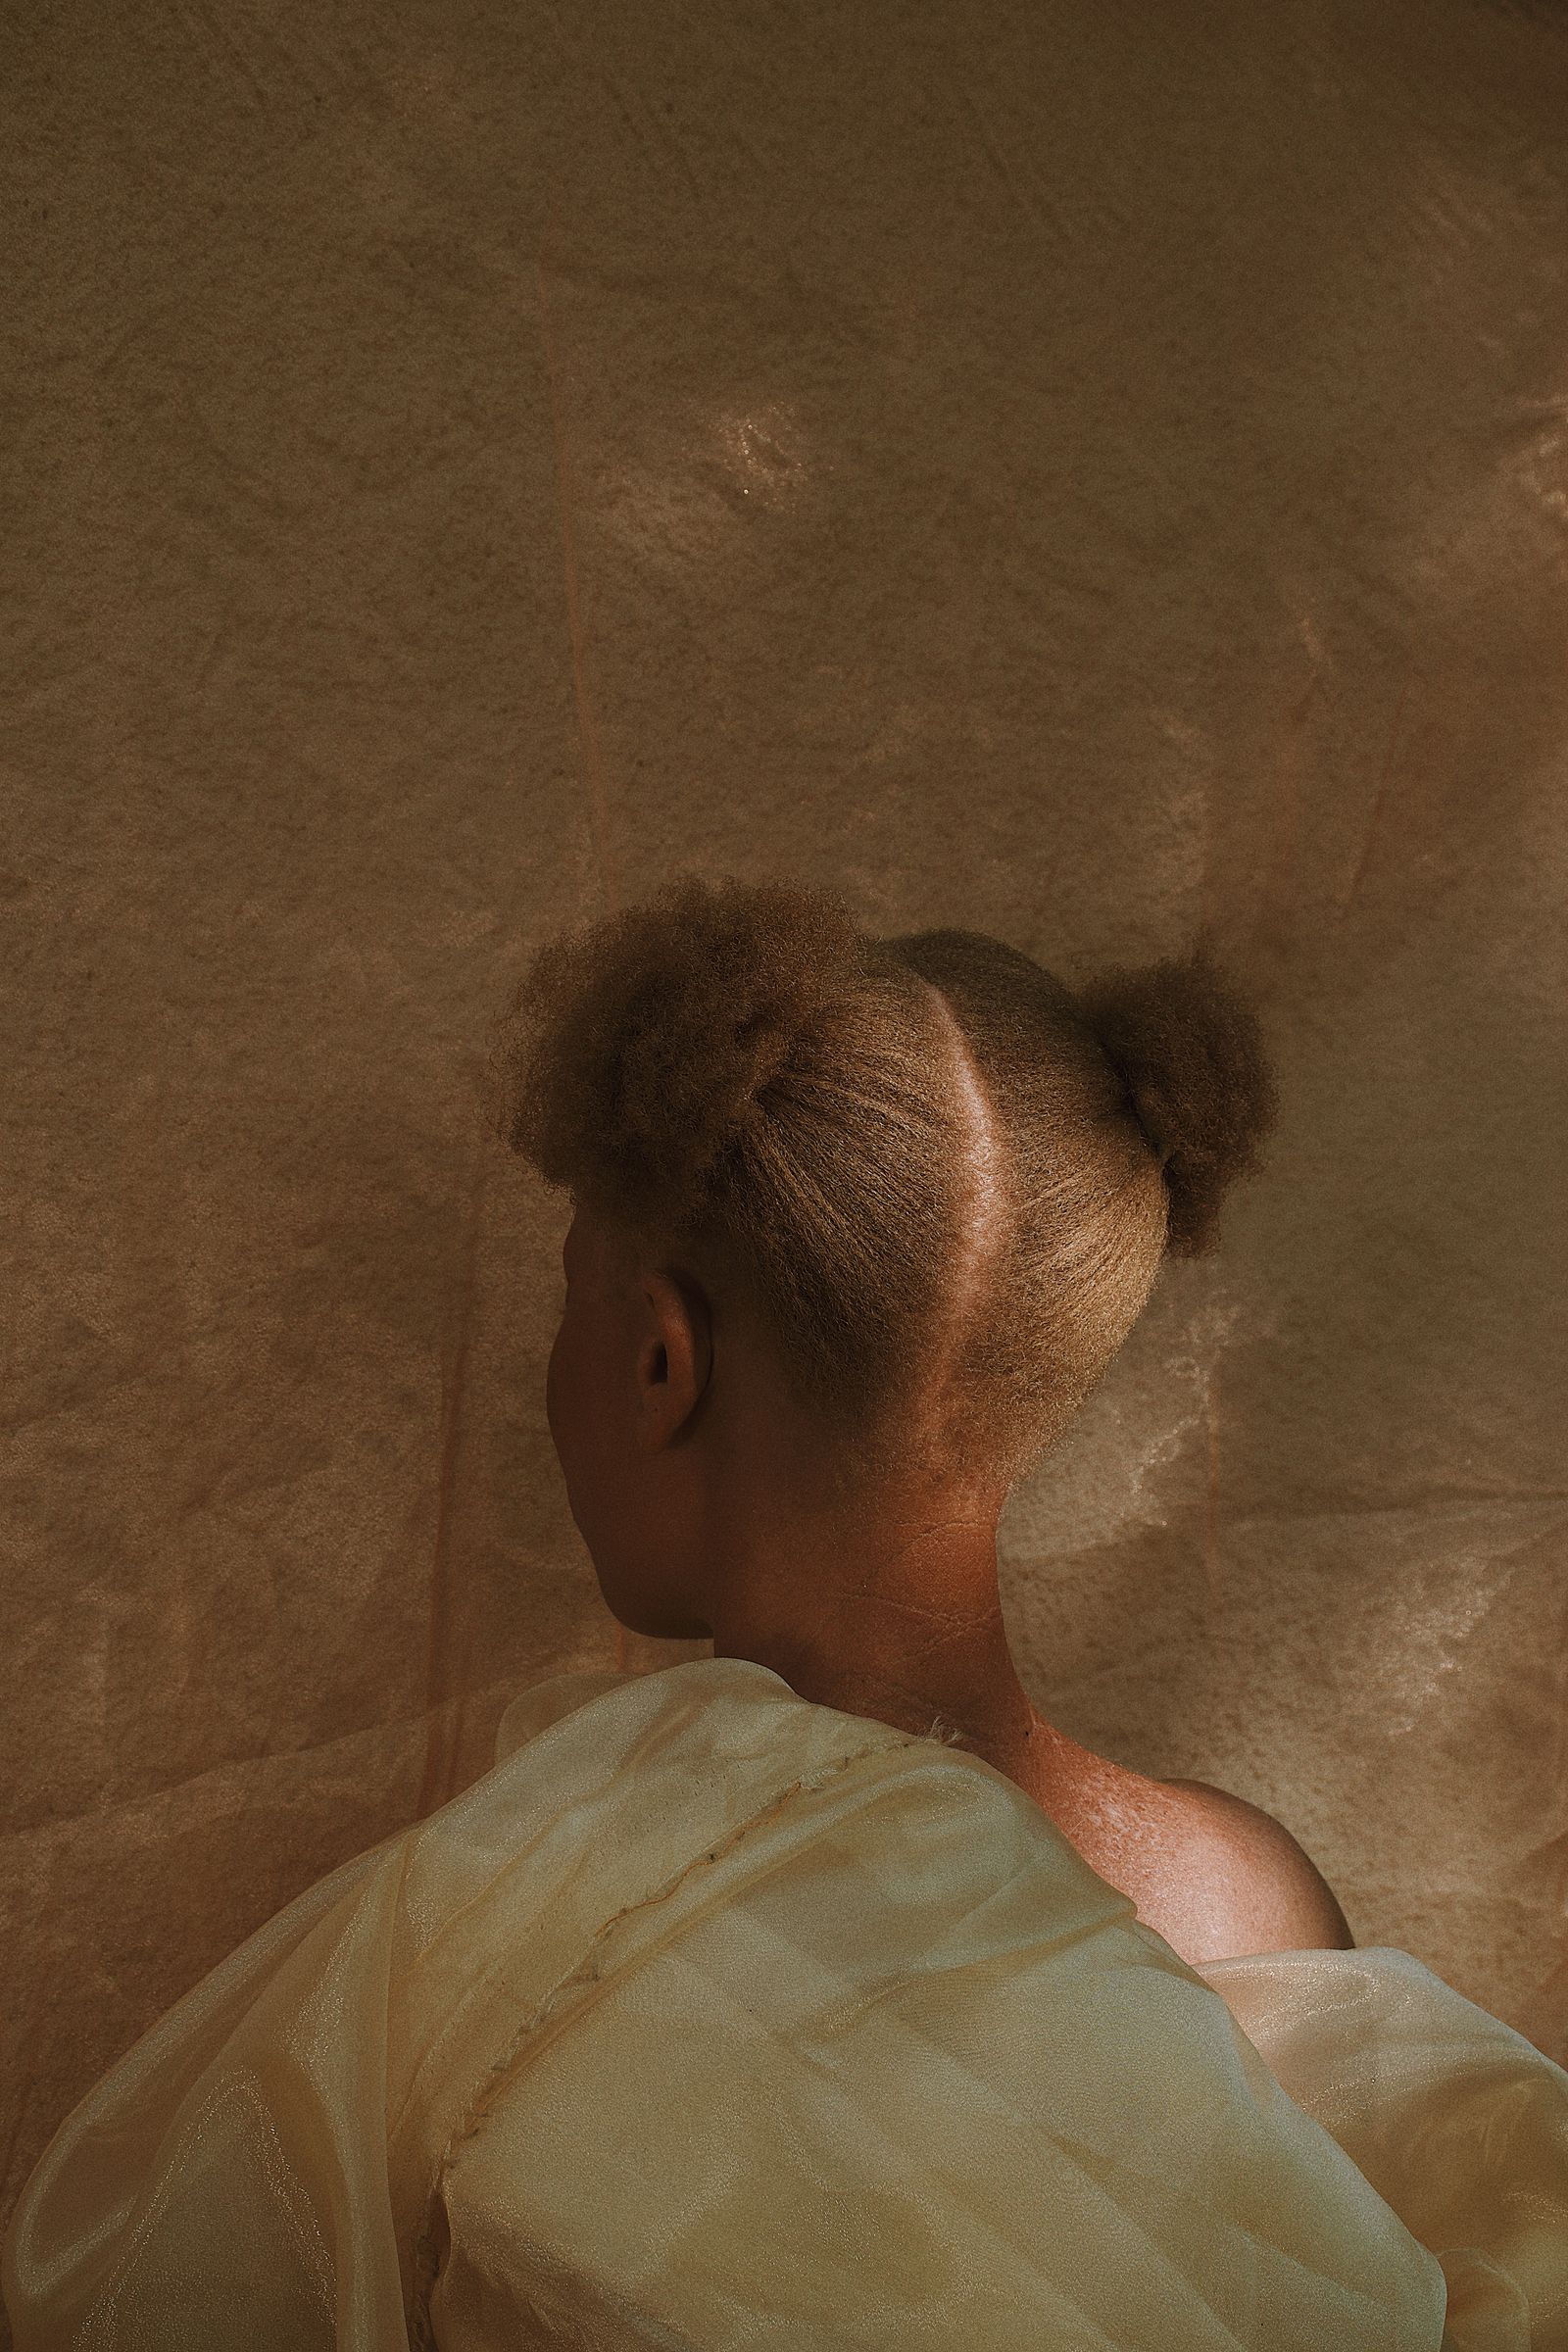 © Keren Lasme - Image from the Beneath our skin lies the sun photography project